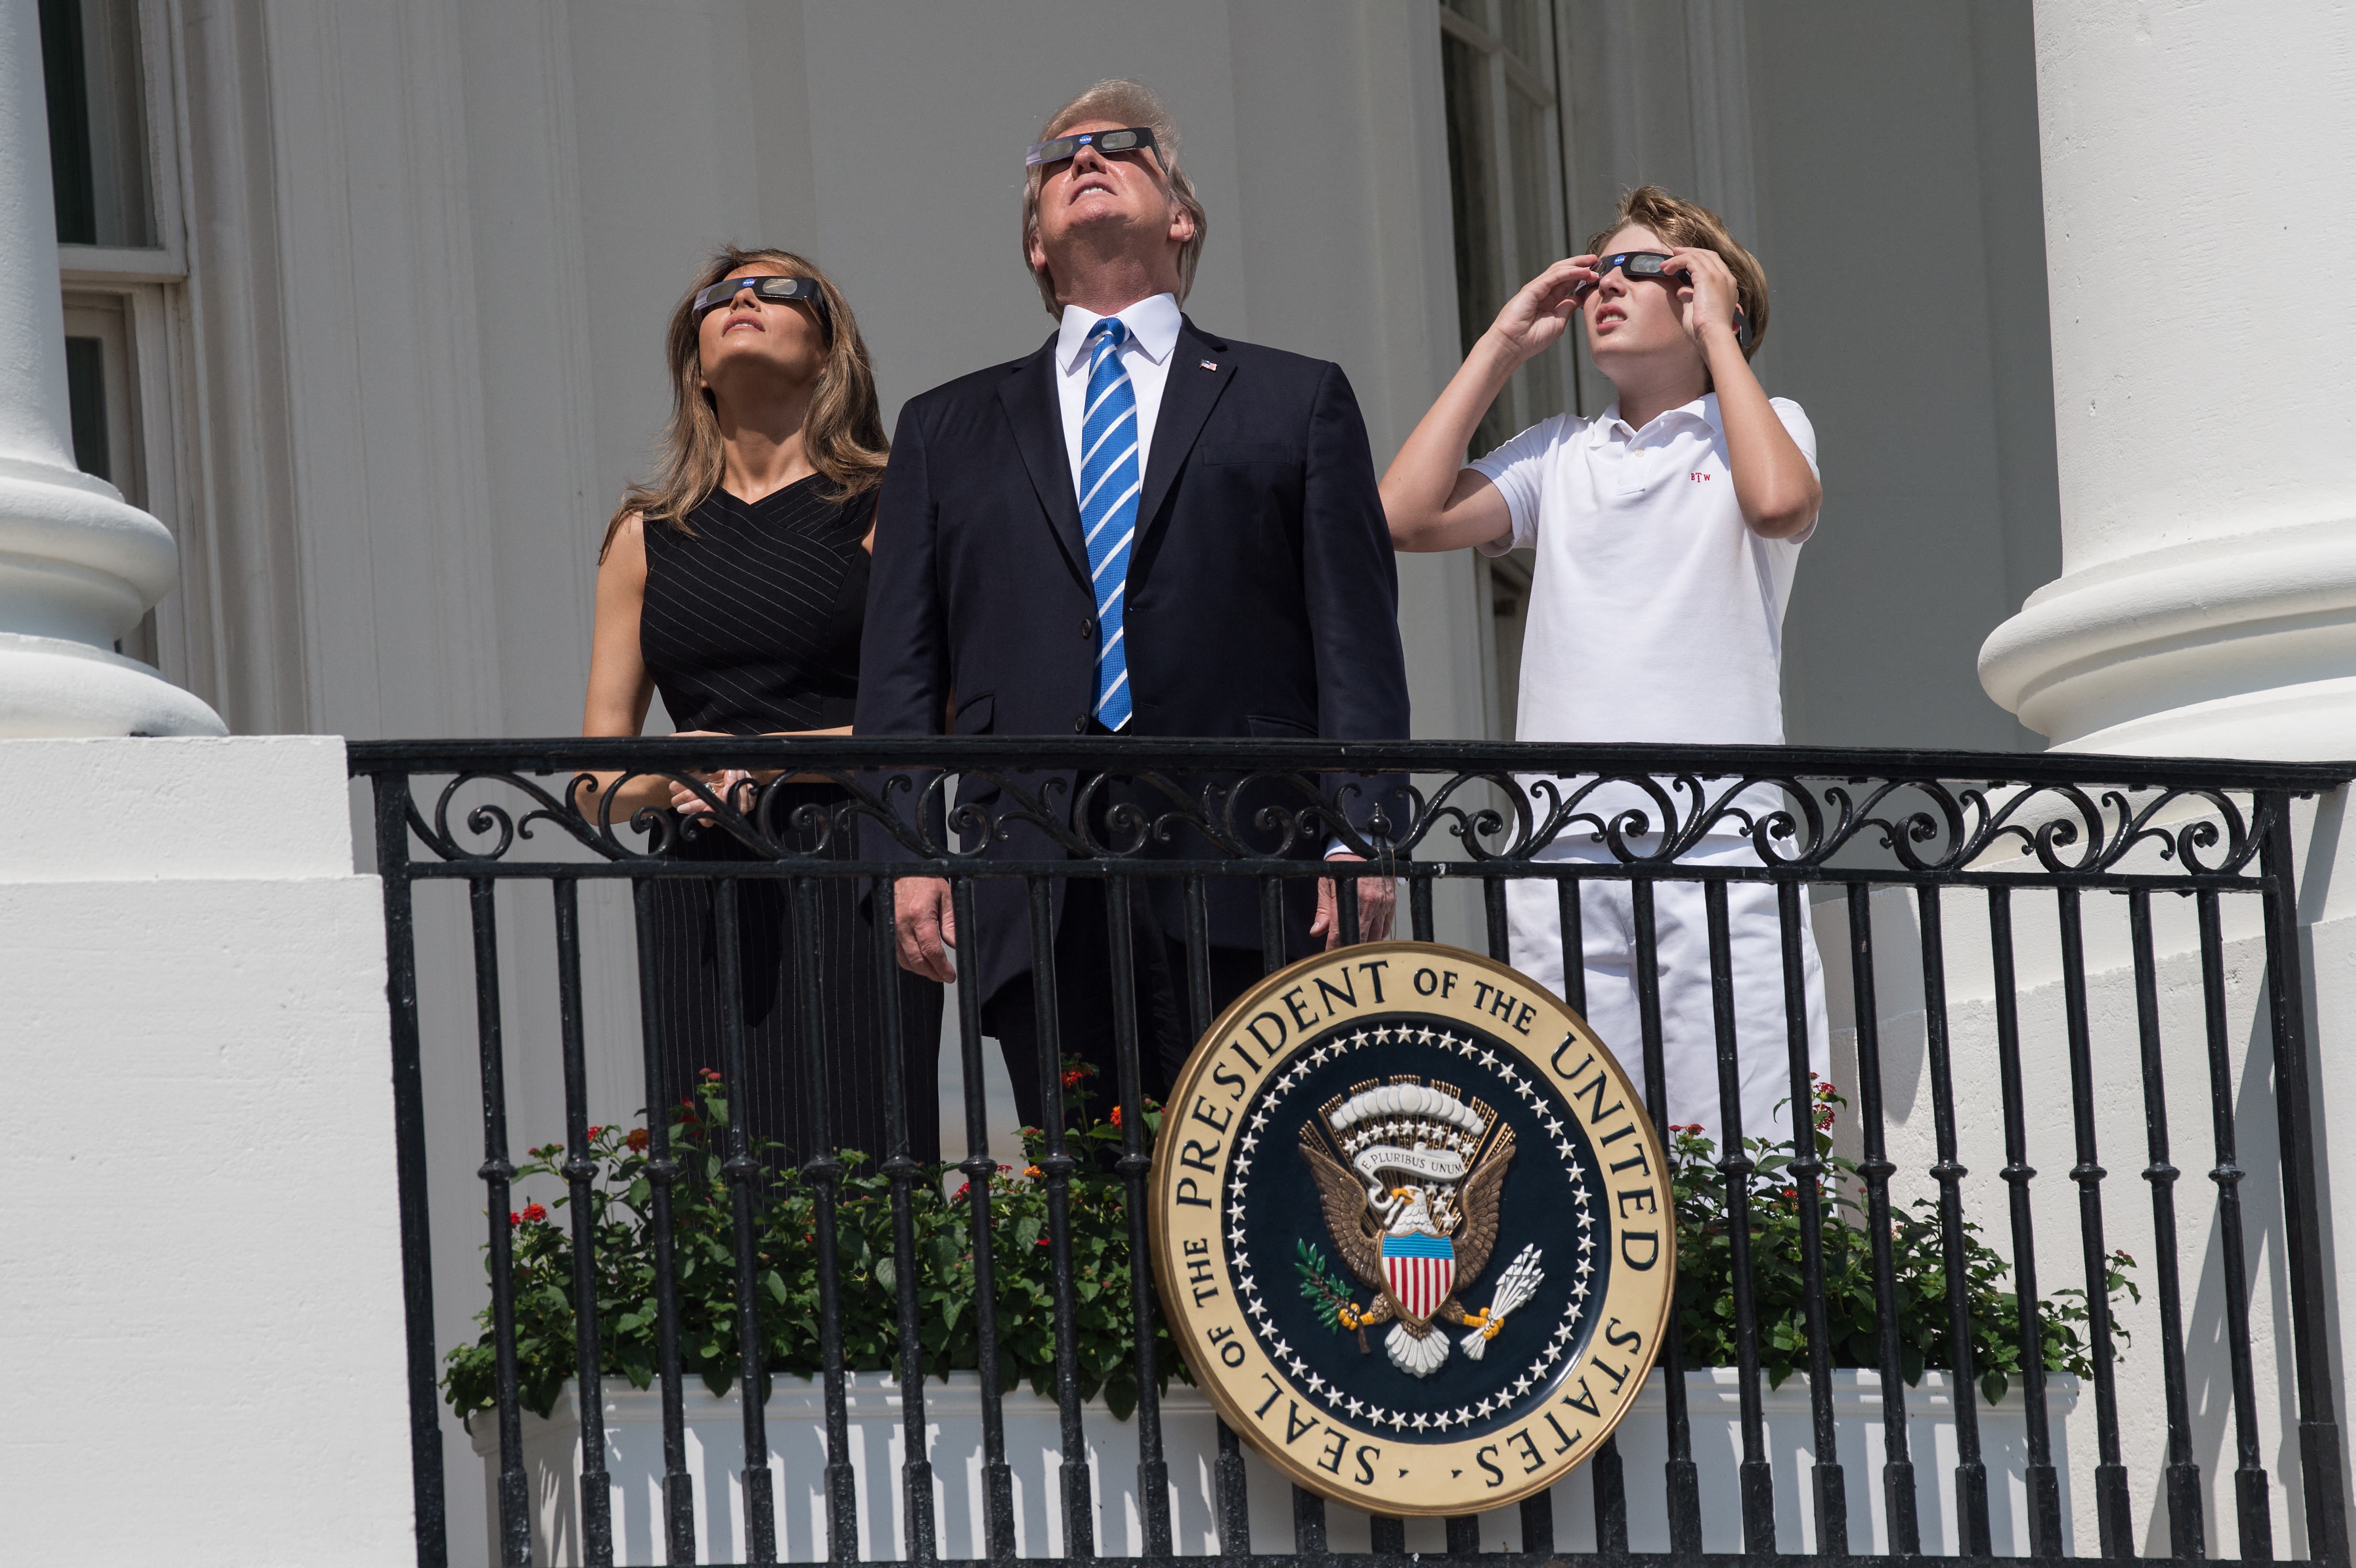 A young Barron Trump joins his parents on the White House balcony to observe a solar eclipse on 21 August 2017